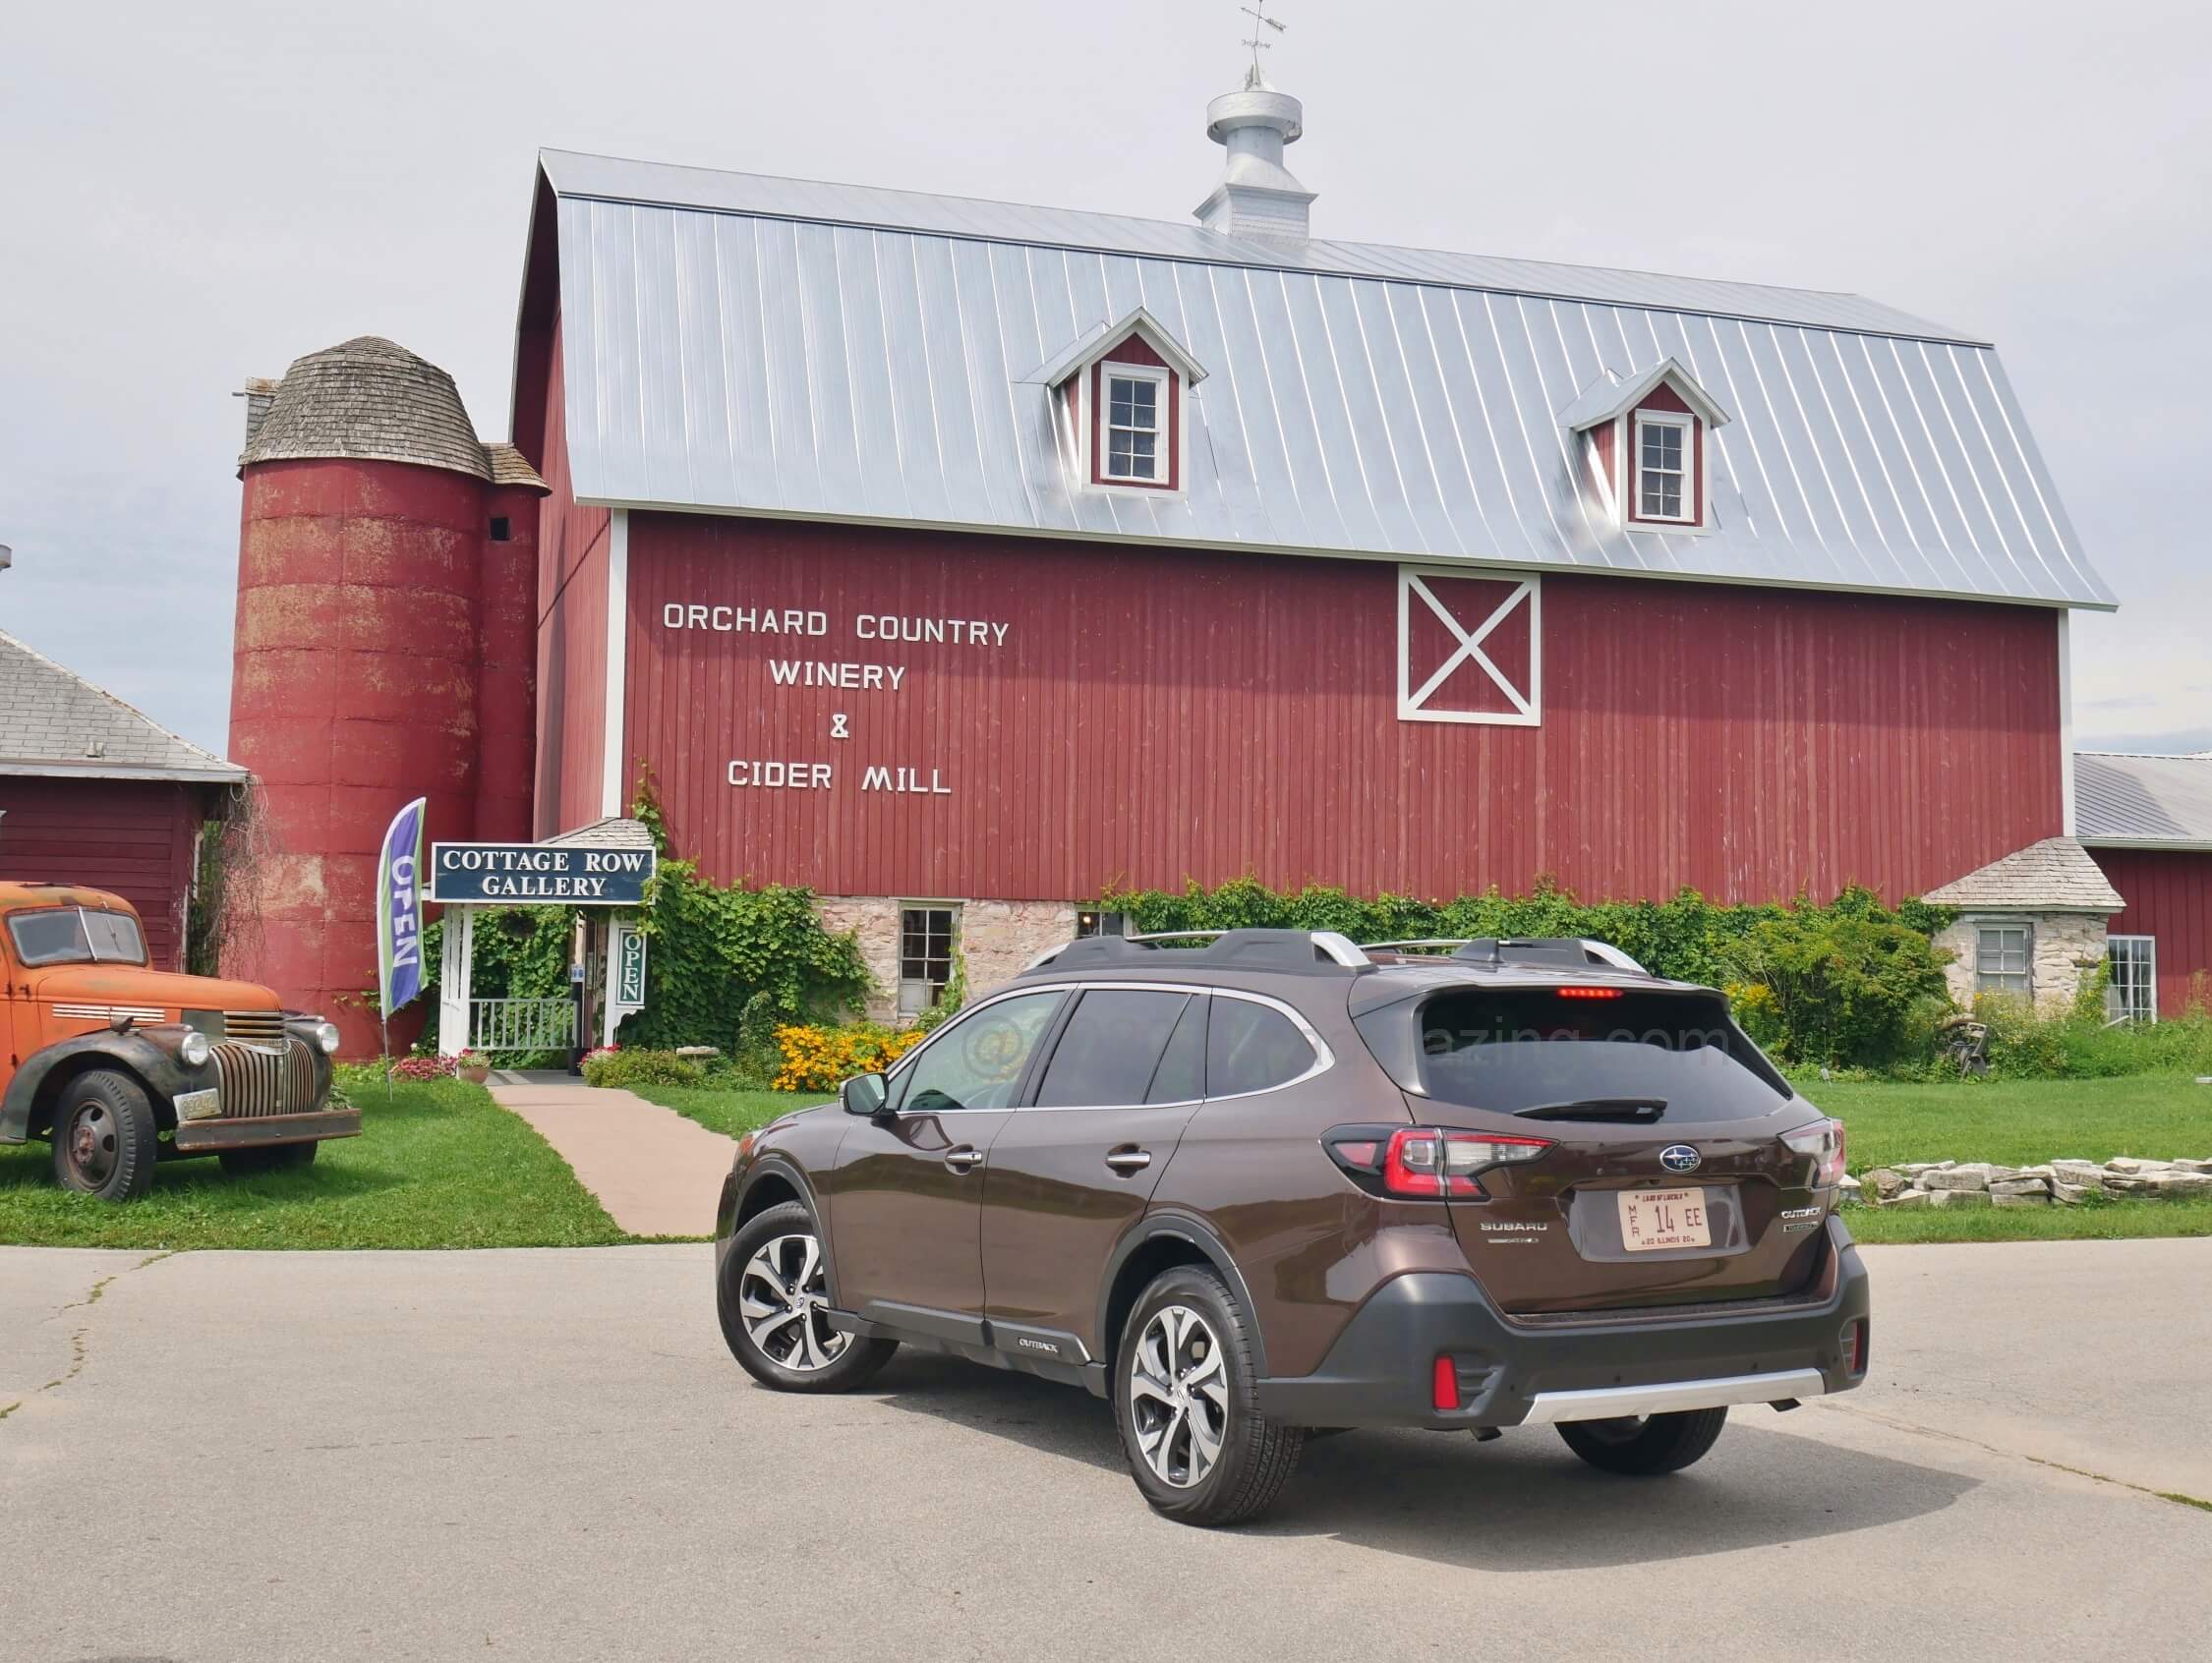 Subaru Outback Touring XT: Out for cherry preserves in Door County, Wisconsin